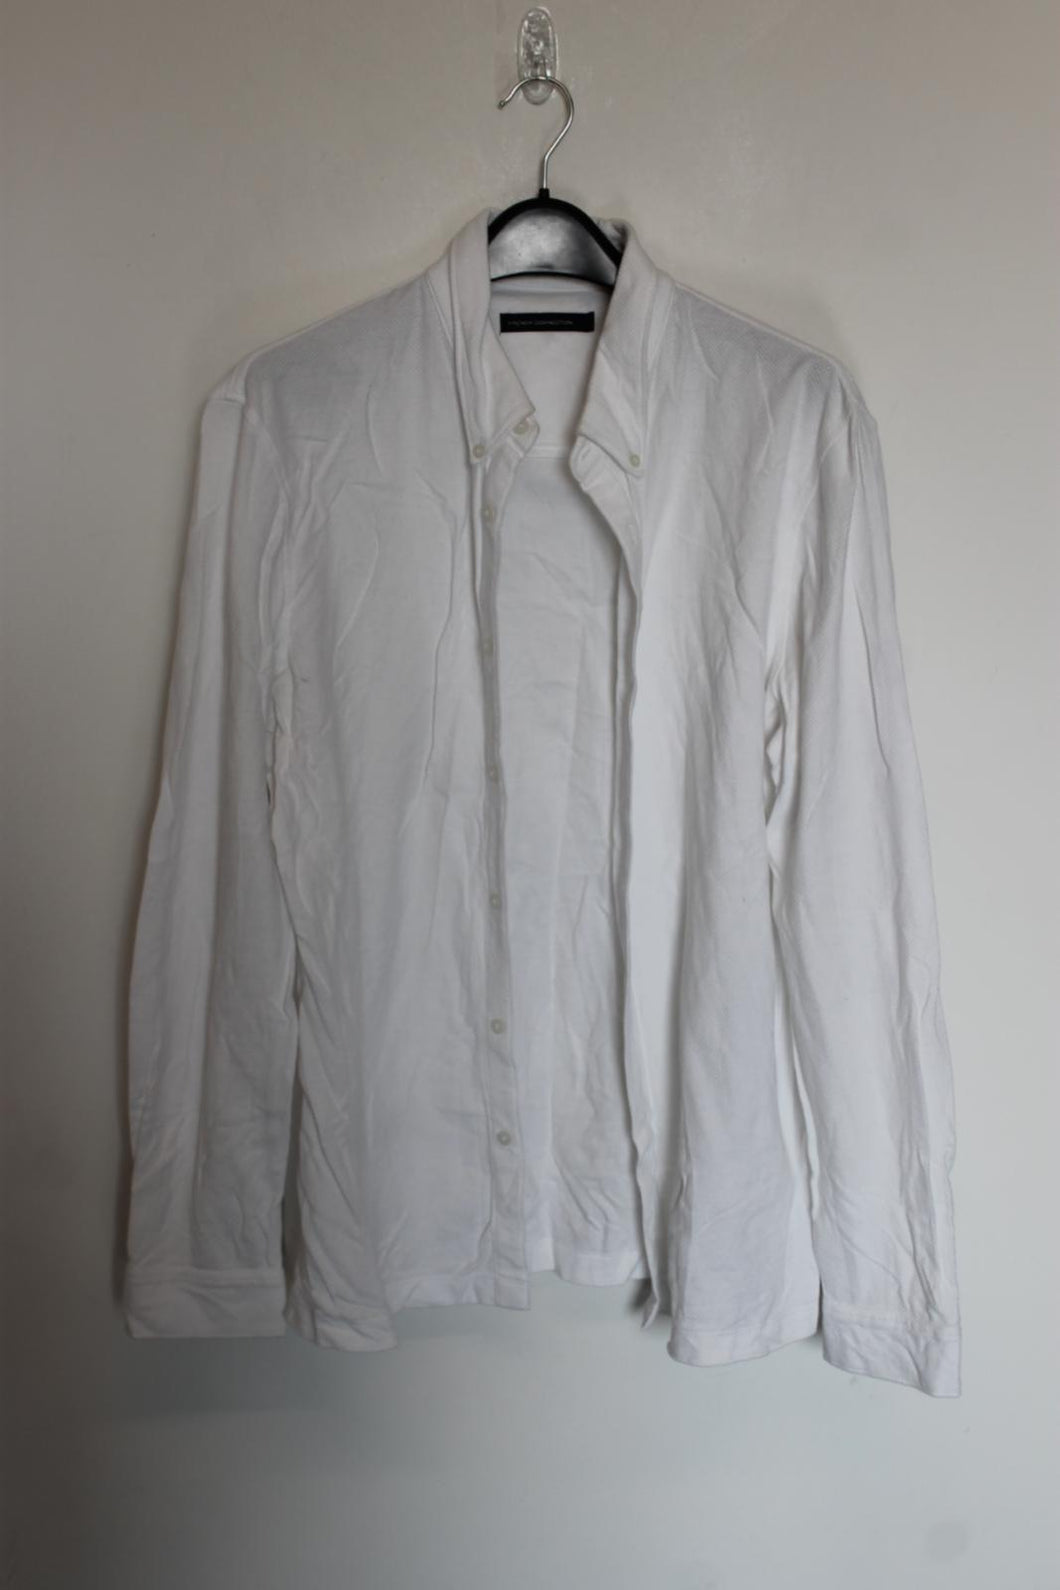 FRENCH CONNECTION Men's White Cotton Long Sleeve Button Down Shirt Size L